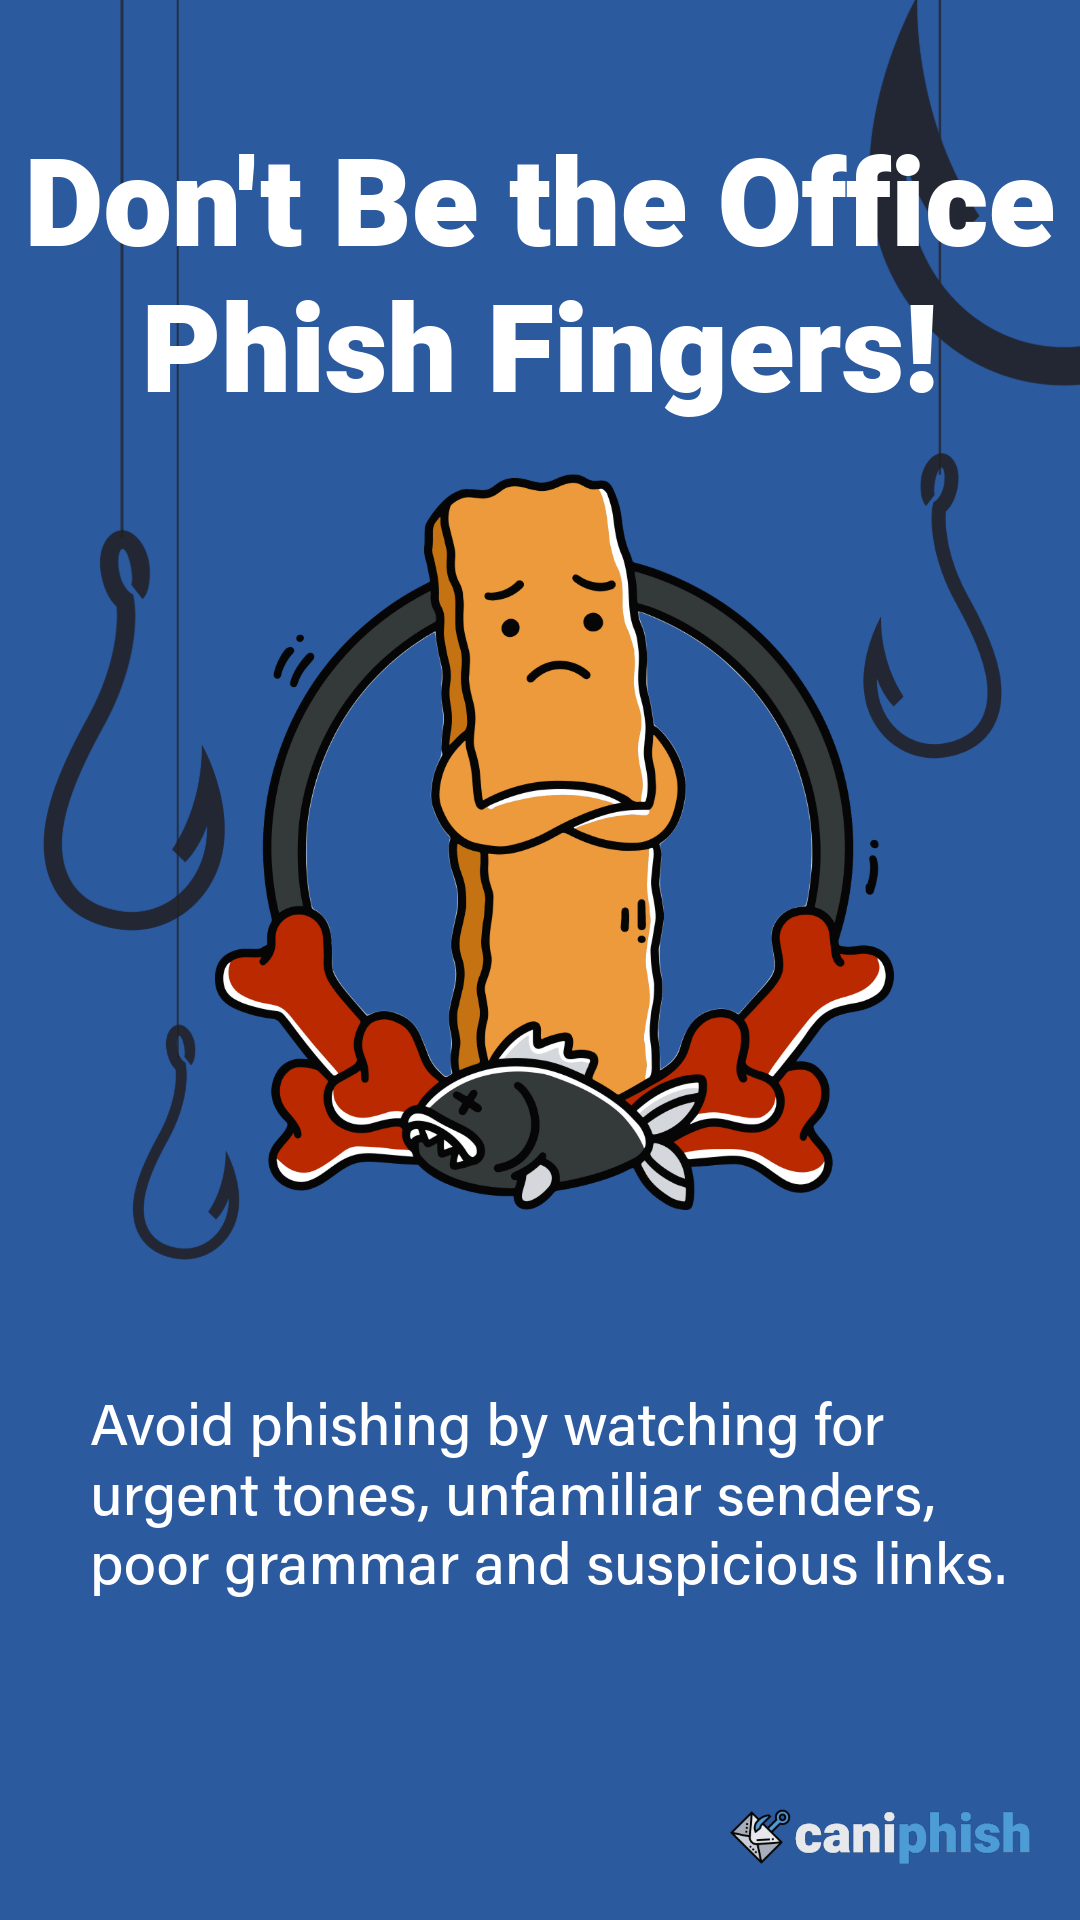 Poster depicting how to avoid phishing attacks.